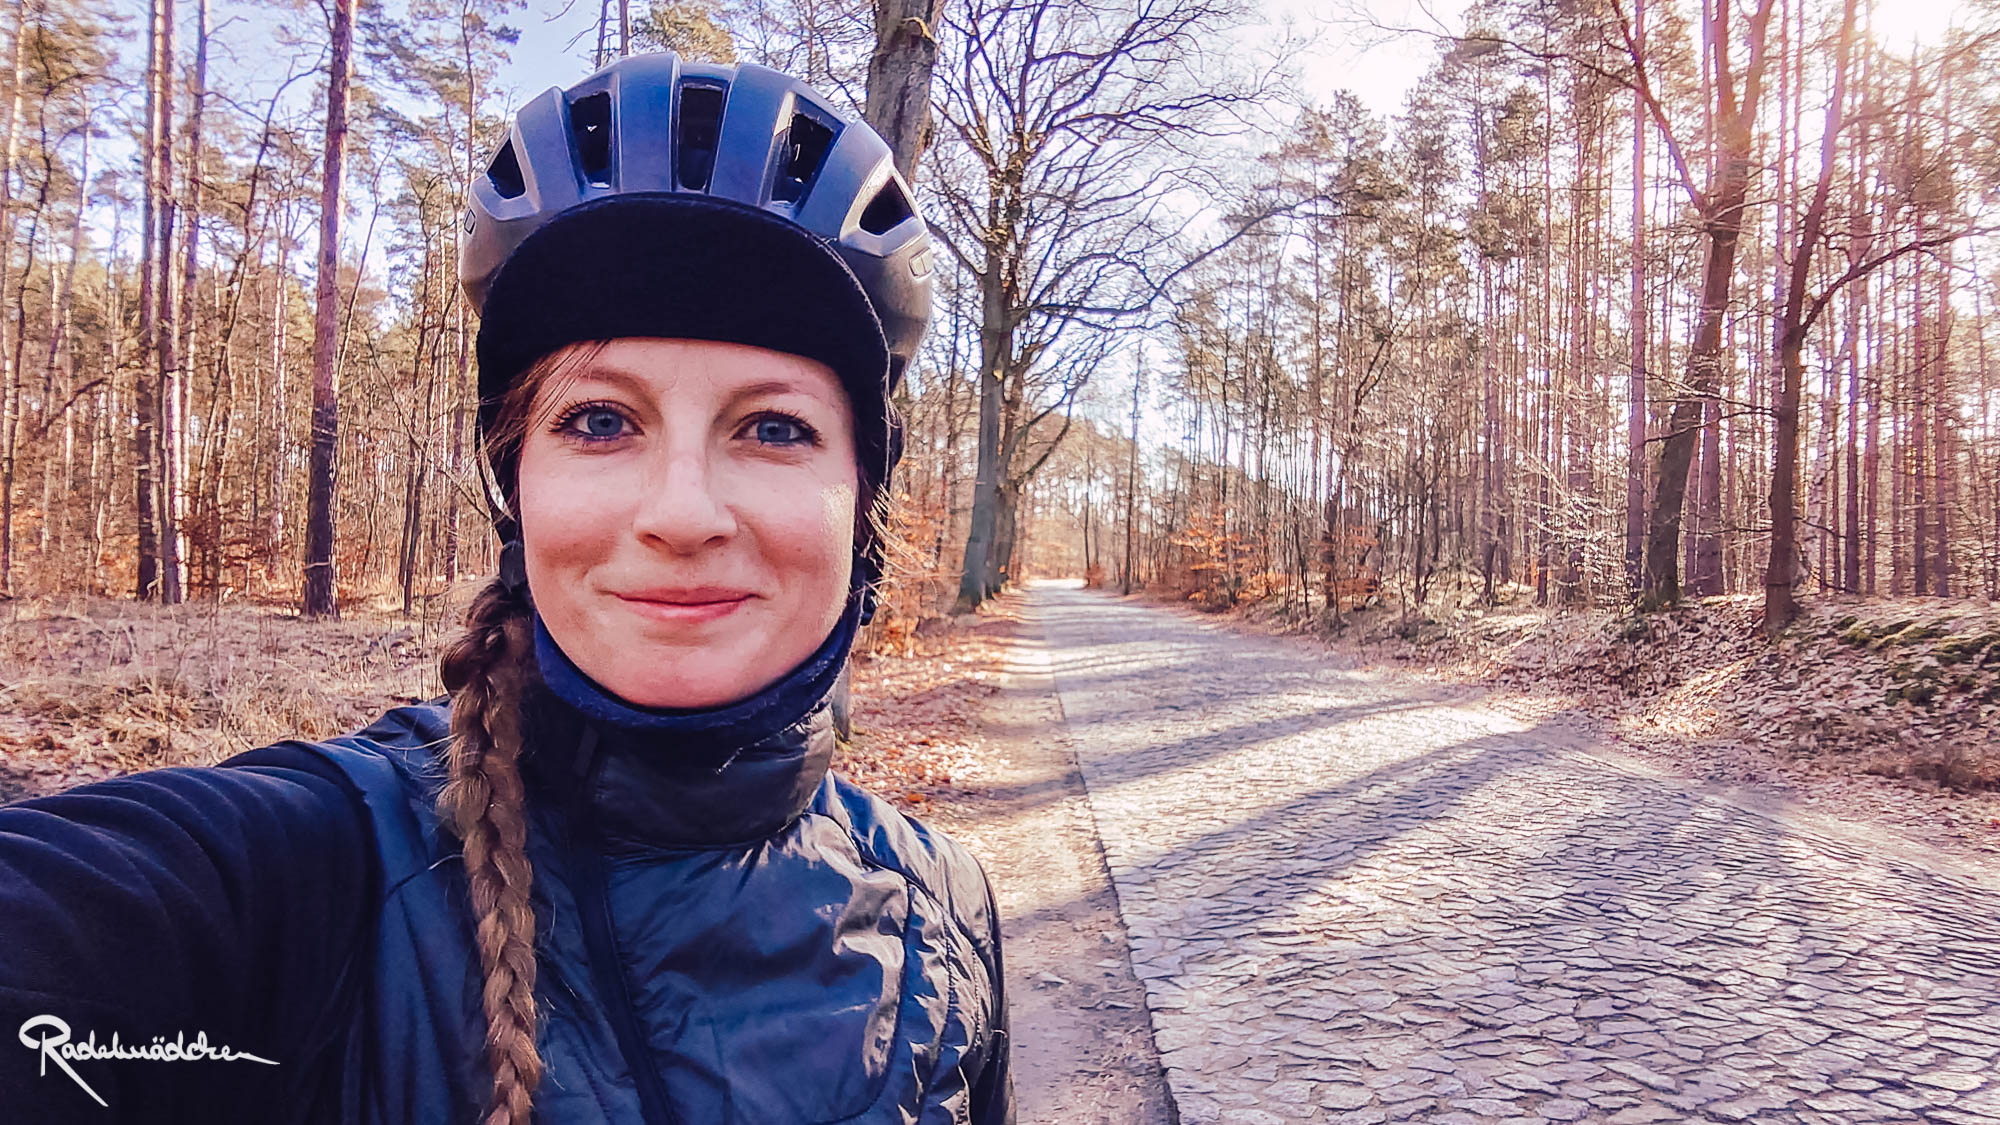 Jule in cycling apparel in the woods with cobblestone road